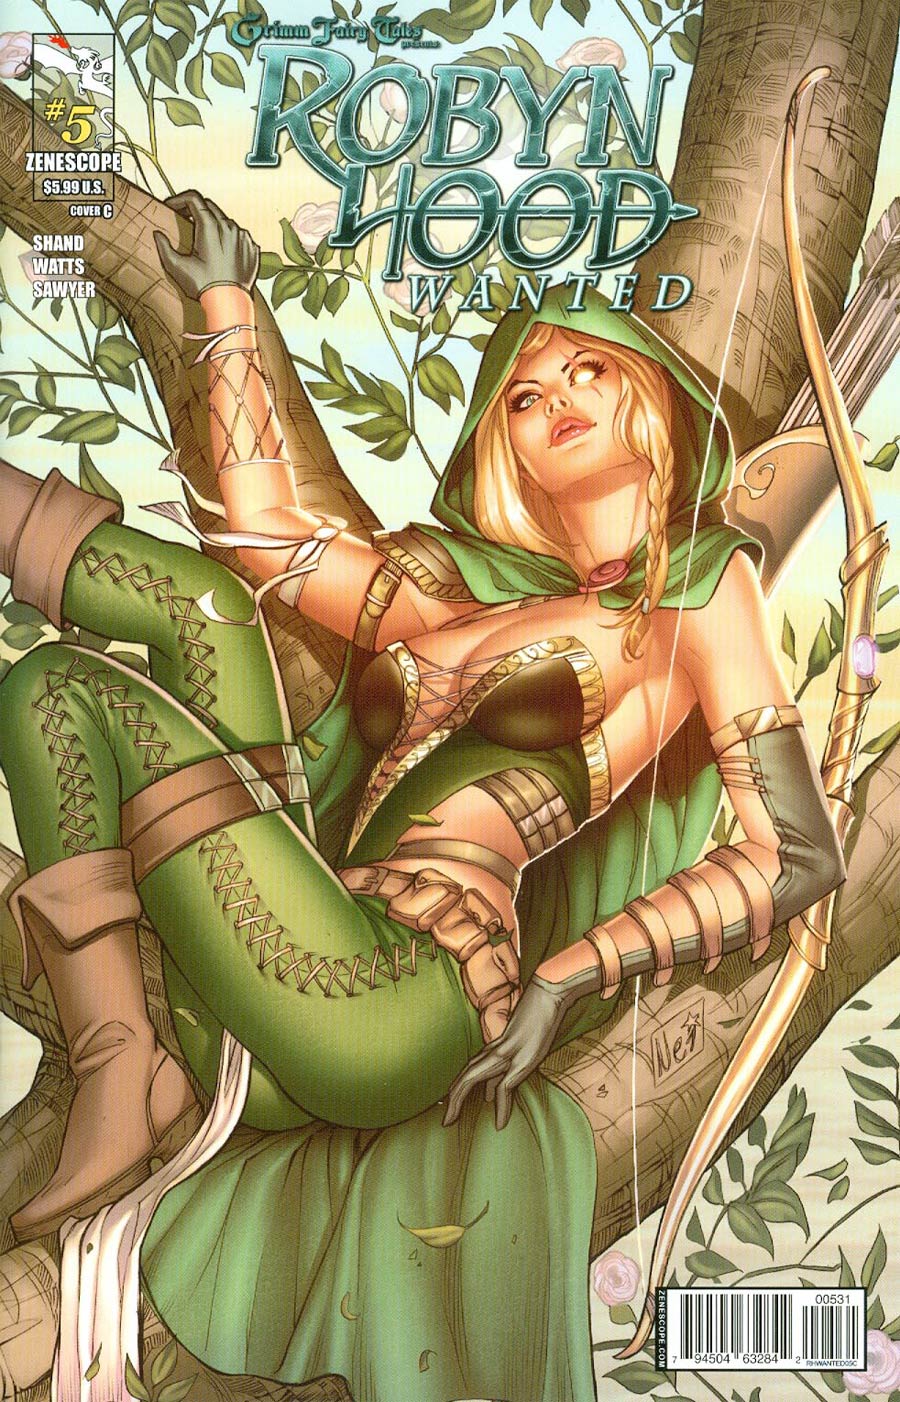 Grimm Fairy Tales Presents Robyn Hood Wanted #5 Cover C Nei Ruffino